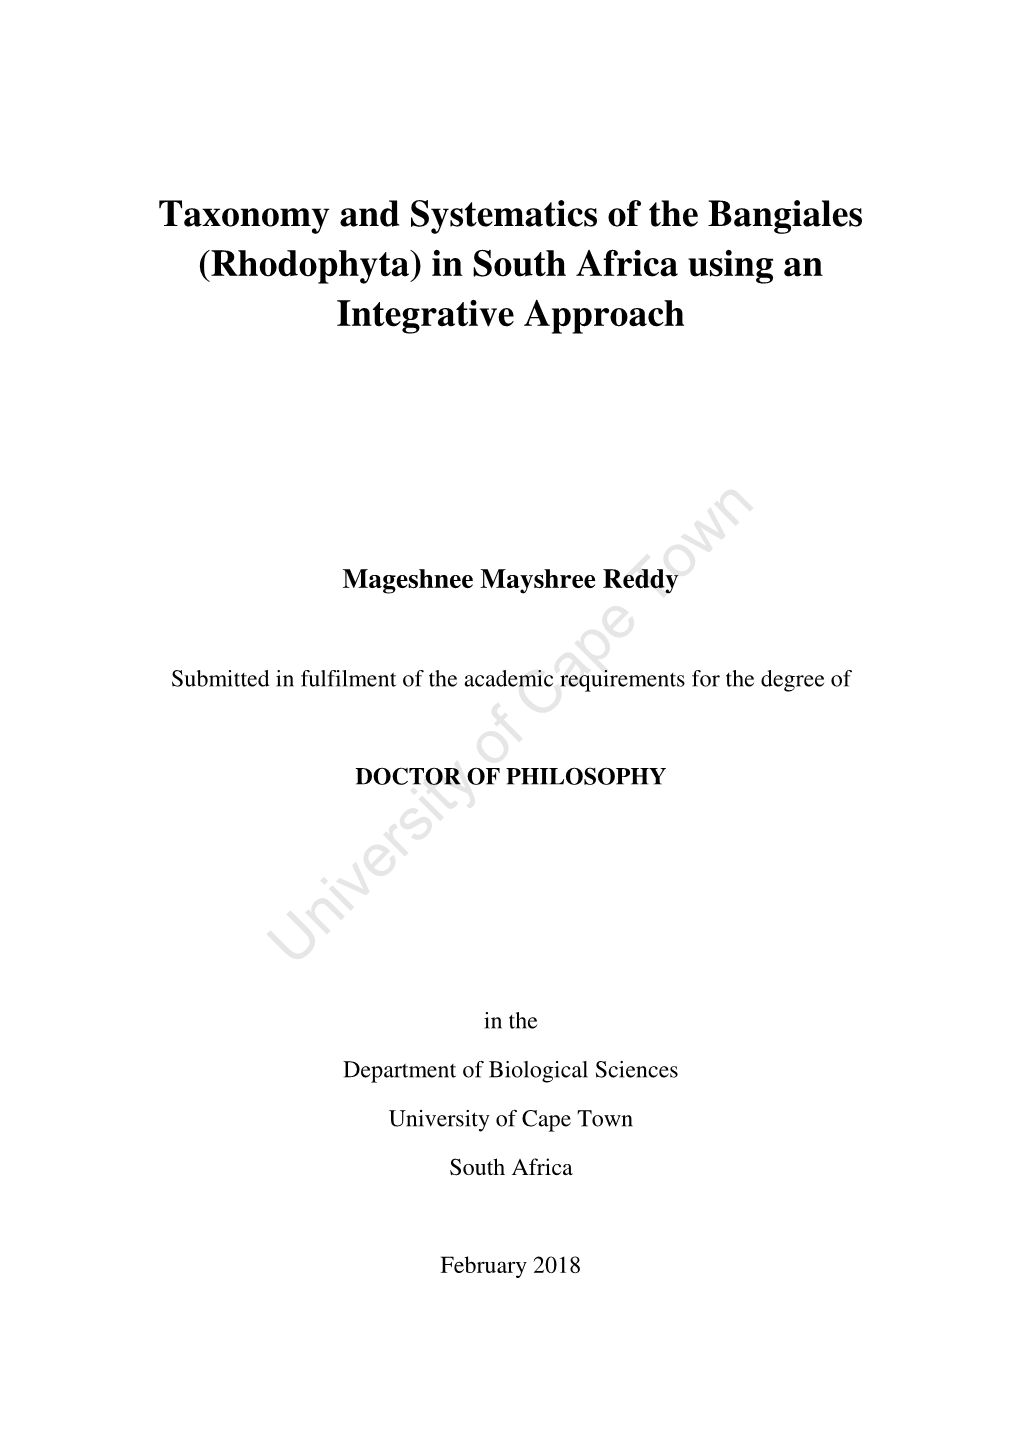 (Rhodophyta) in South Africa Using an Integrative Approach